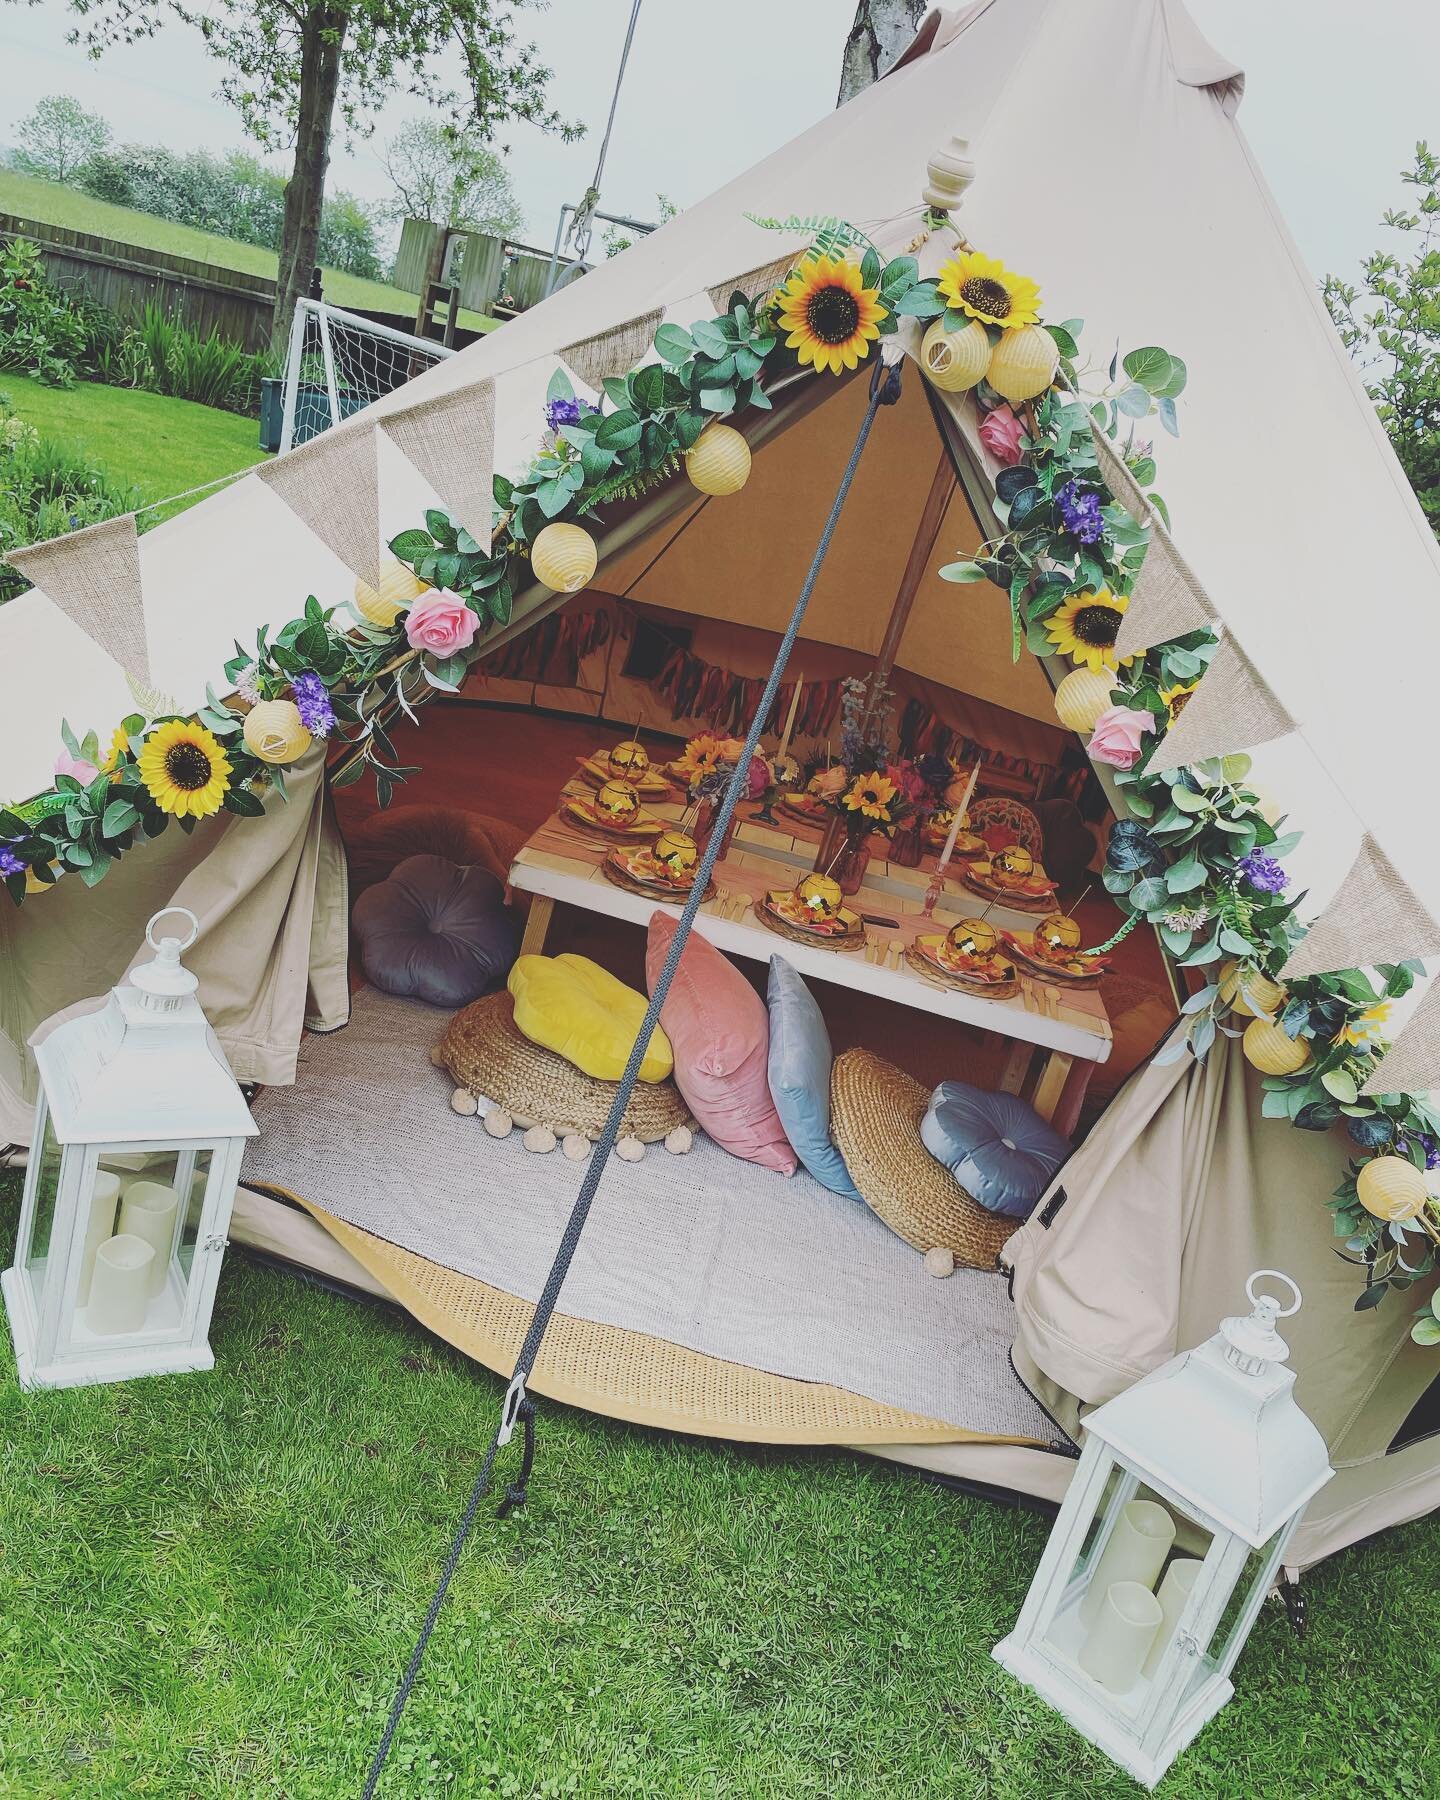 Revisiting a lovely family, this time we set up our lovely 4m bell tent with our coachella festival vibe theme for a garden party for Florence&rsquo;s 9th birthday celebrations 🌸💜🌺💙🌸💛🌺